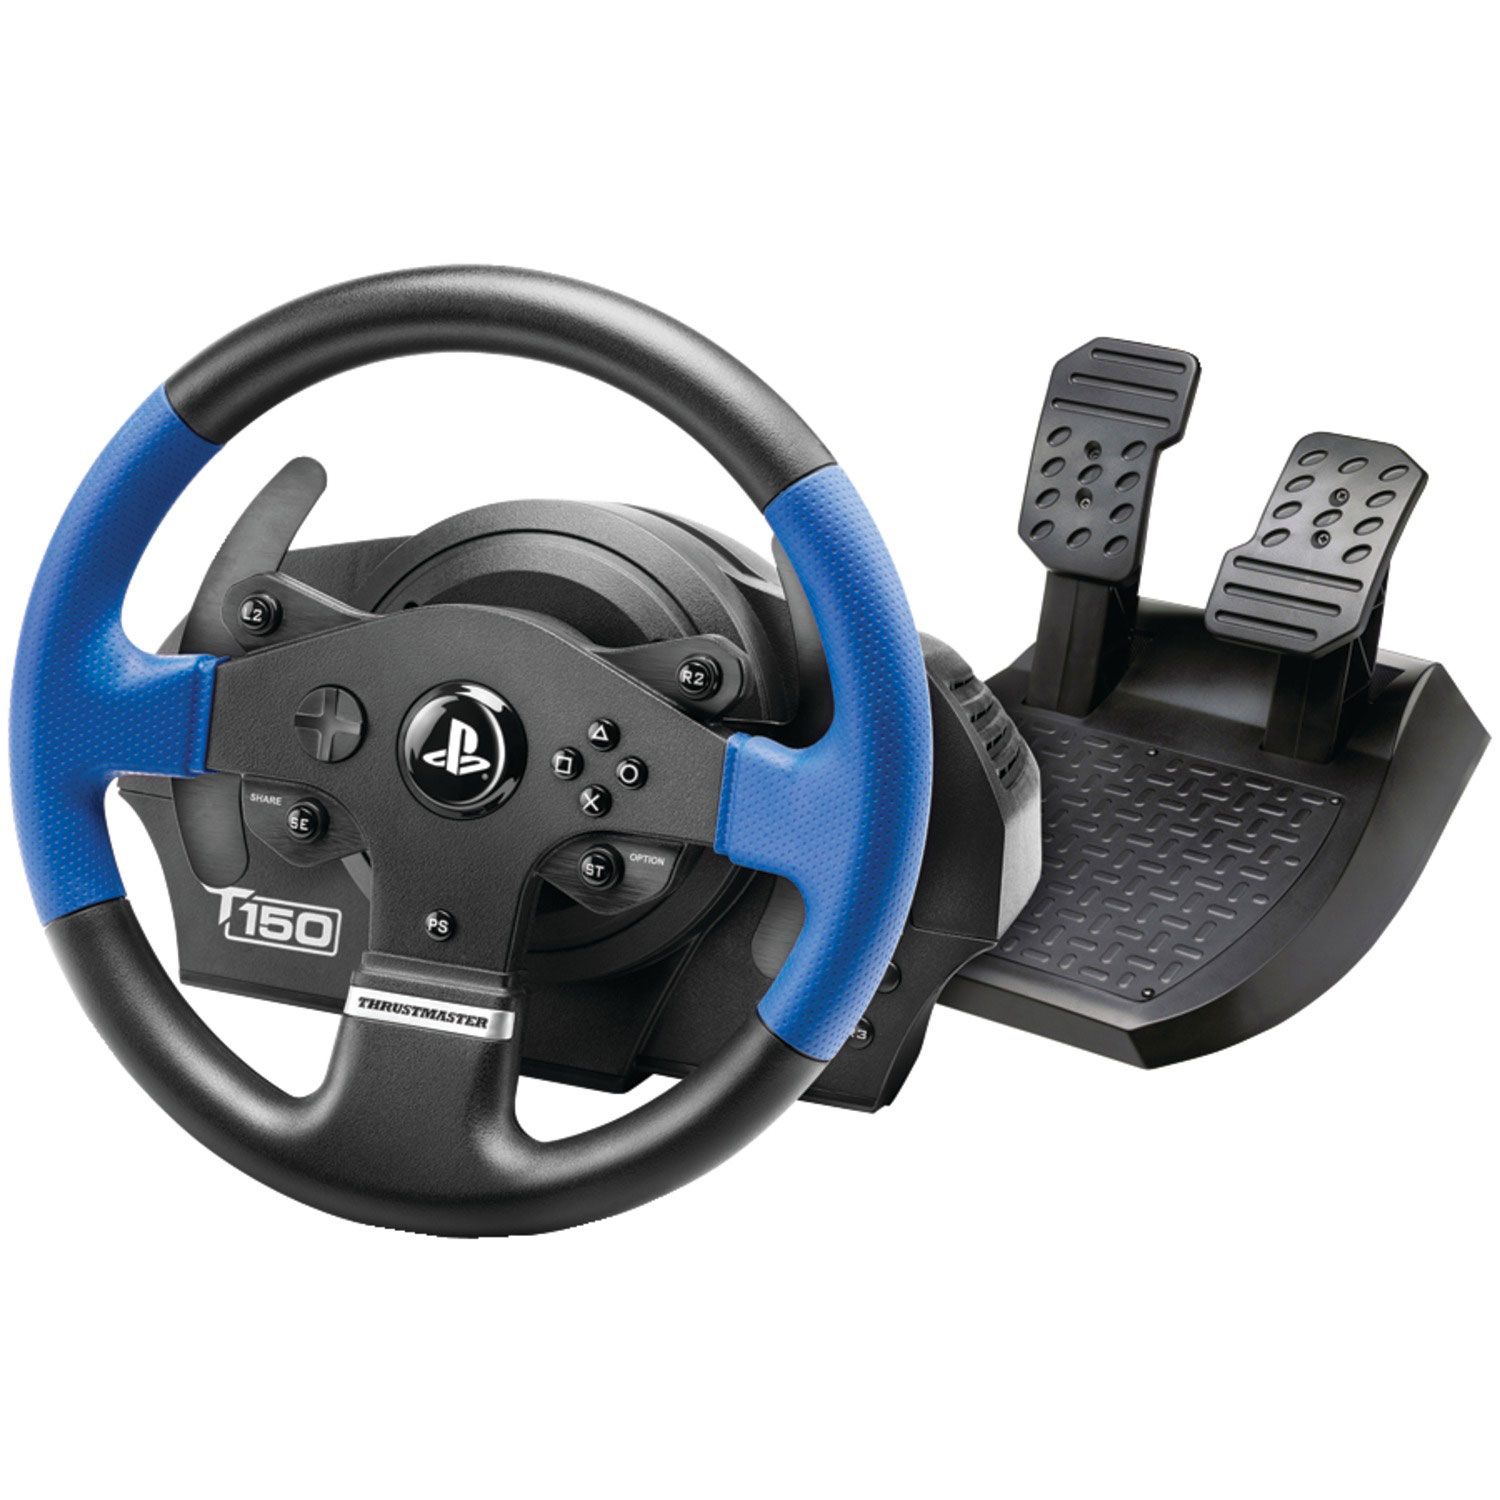 Thrustmaster T150 RS Racing Wheel + 12month iRacing Membership Voucher (PS4 / PS3)